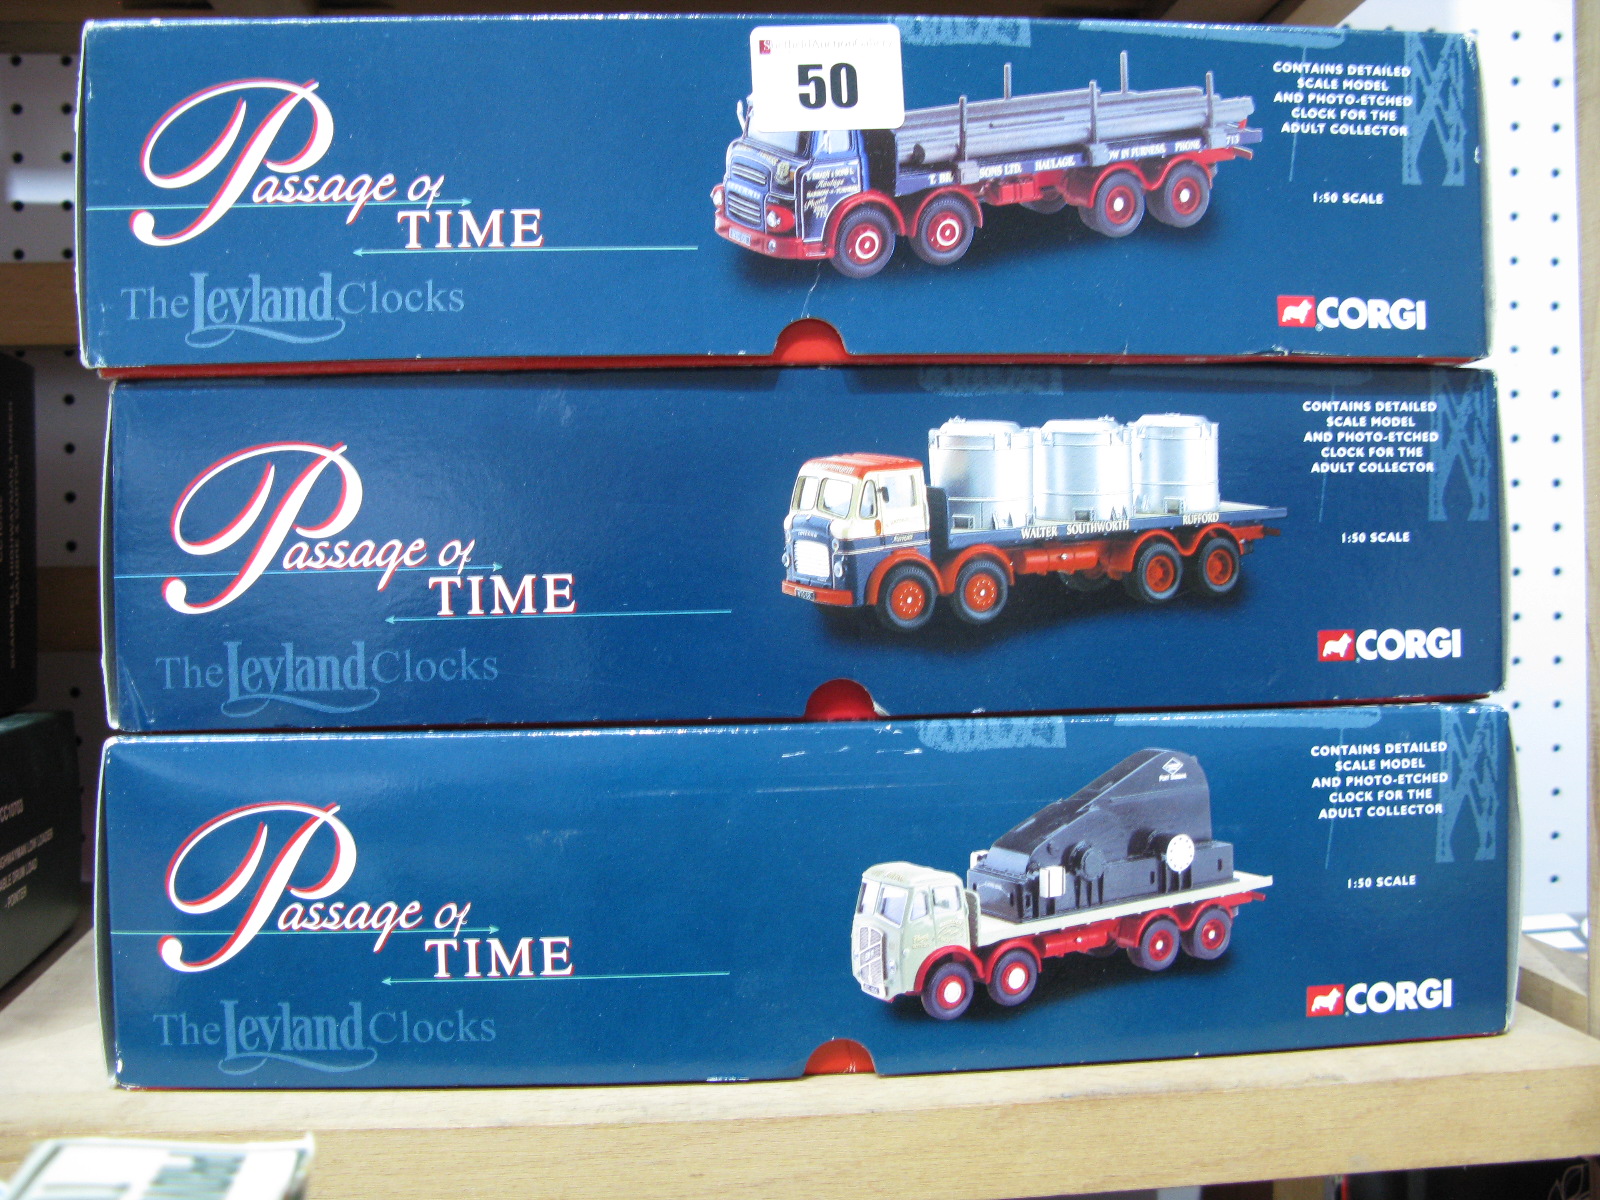 Three 1/50th Scale Corgi Diecast "Passage of Time" Diecast Model Trucks With Loads And scenic